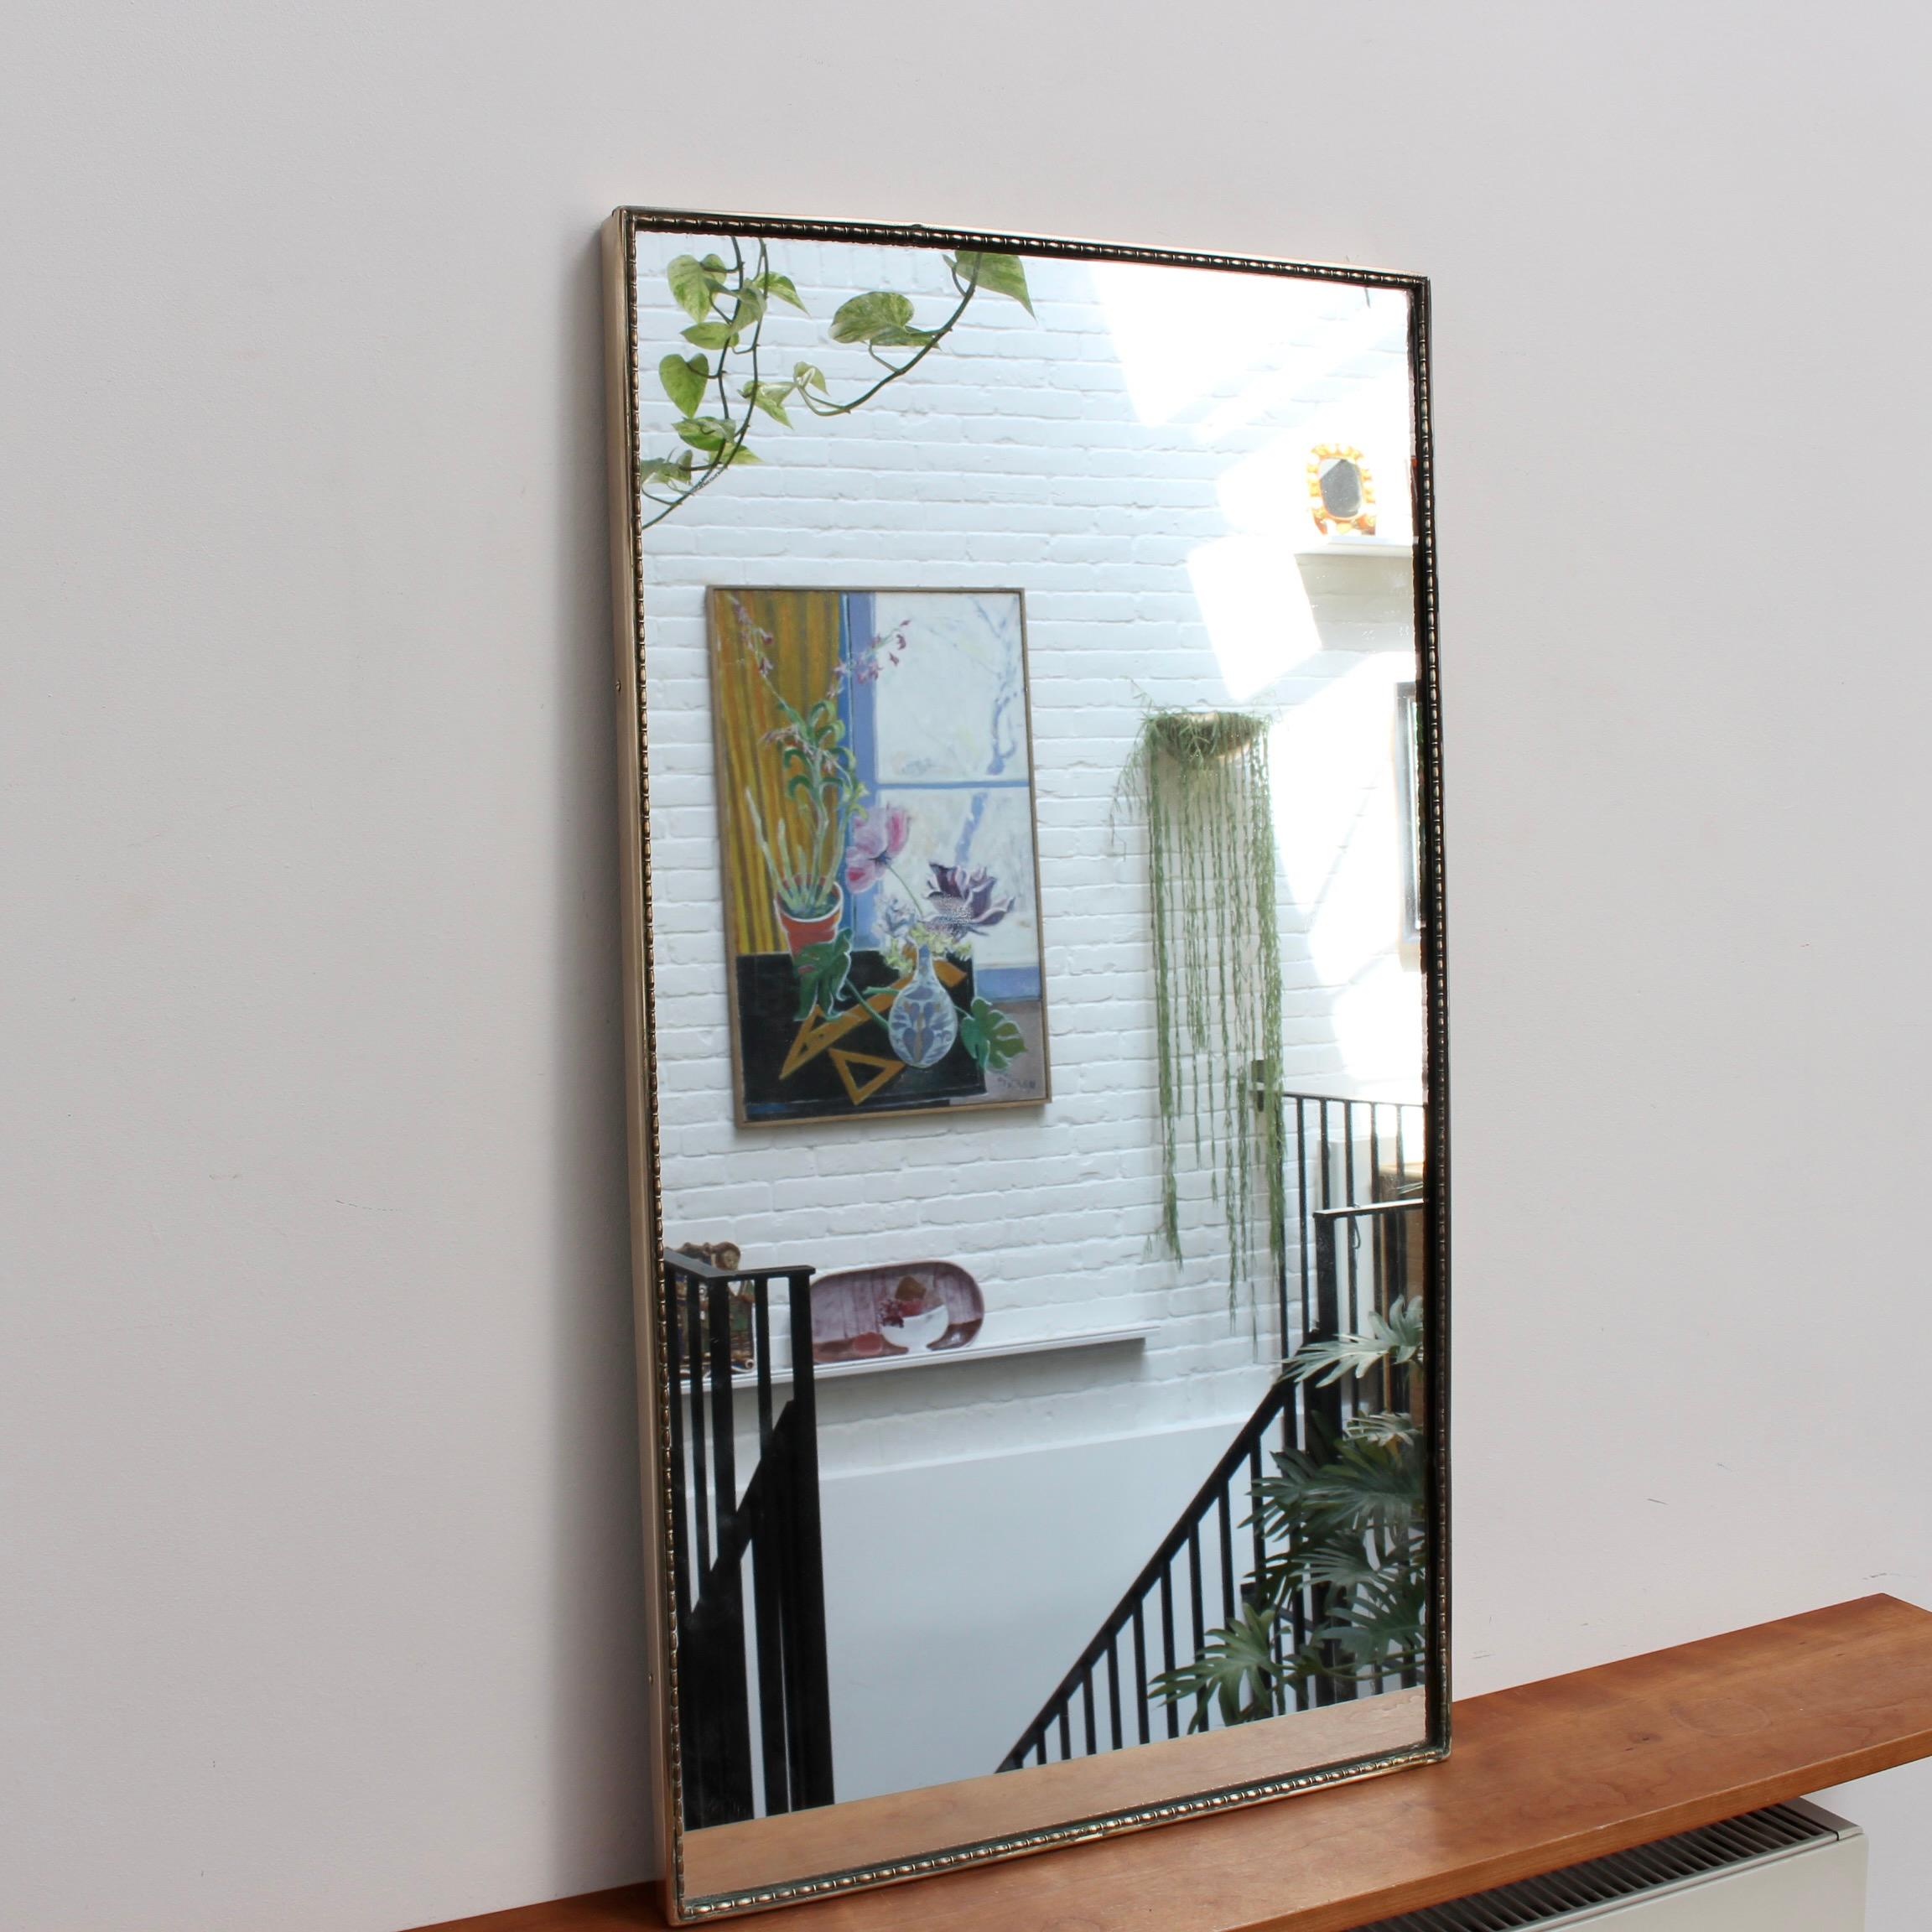 Mid-century Italian wall mirror with brass frame (circa 1950s). The mirror is large, rectangular in shape, smart and distinctive in a modern Gio Ponti style with a distinctive beading outlining the frame. This mirror is in good overall condition.